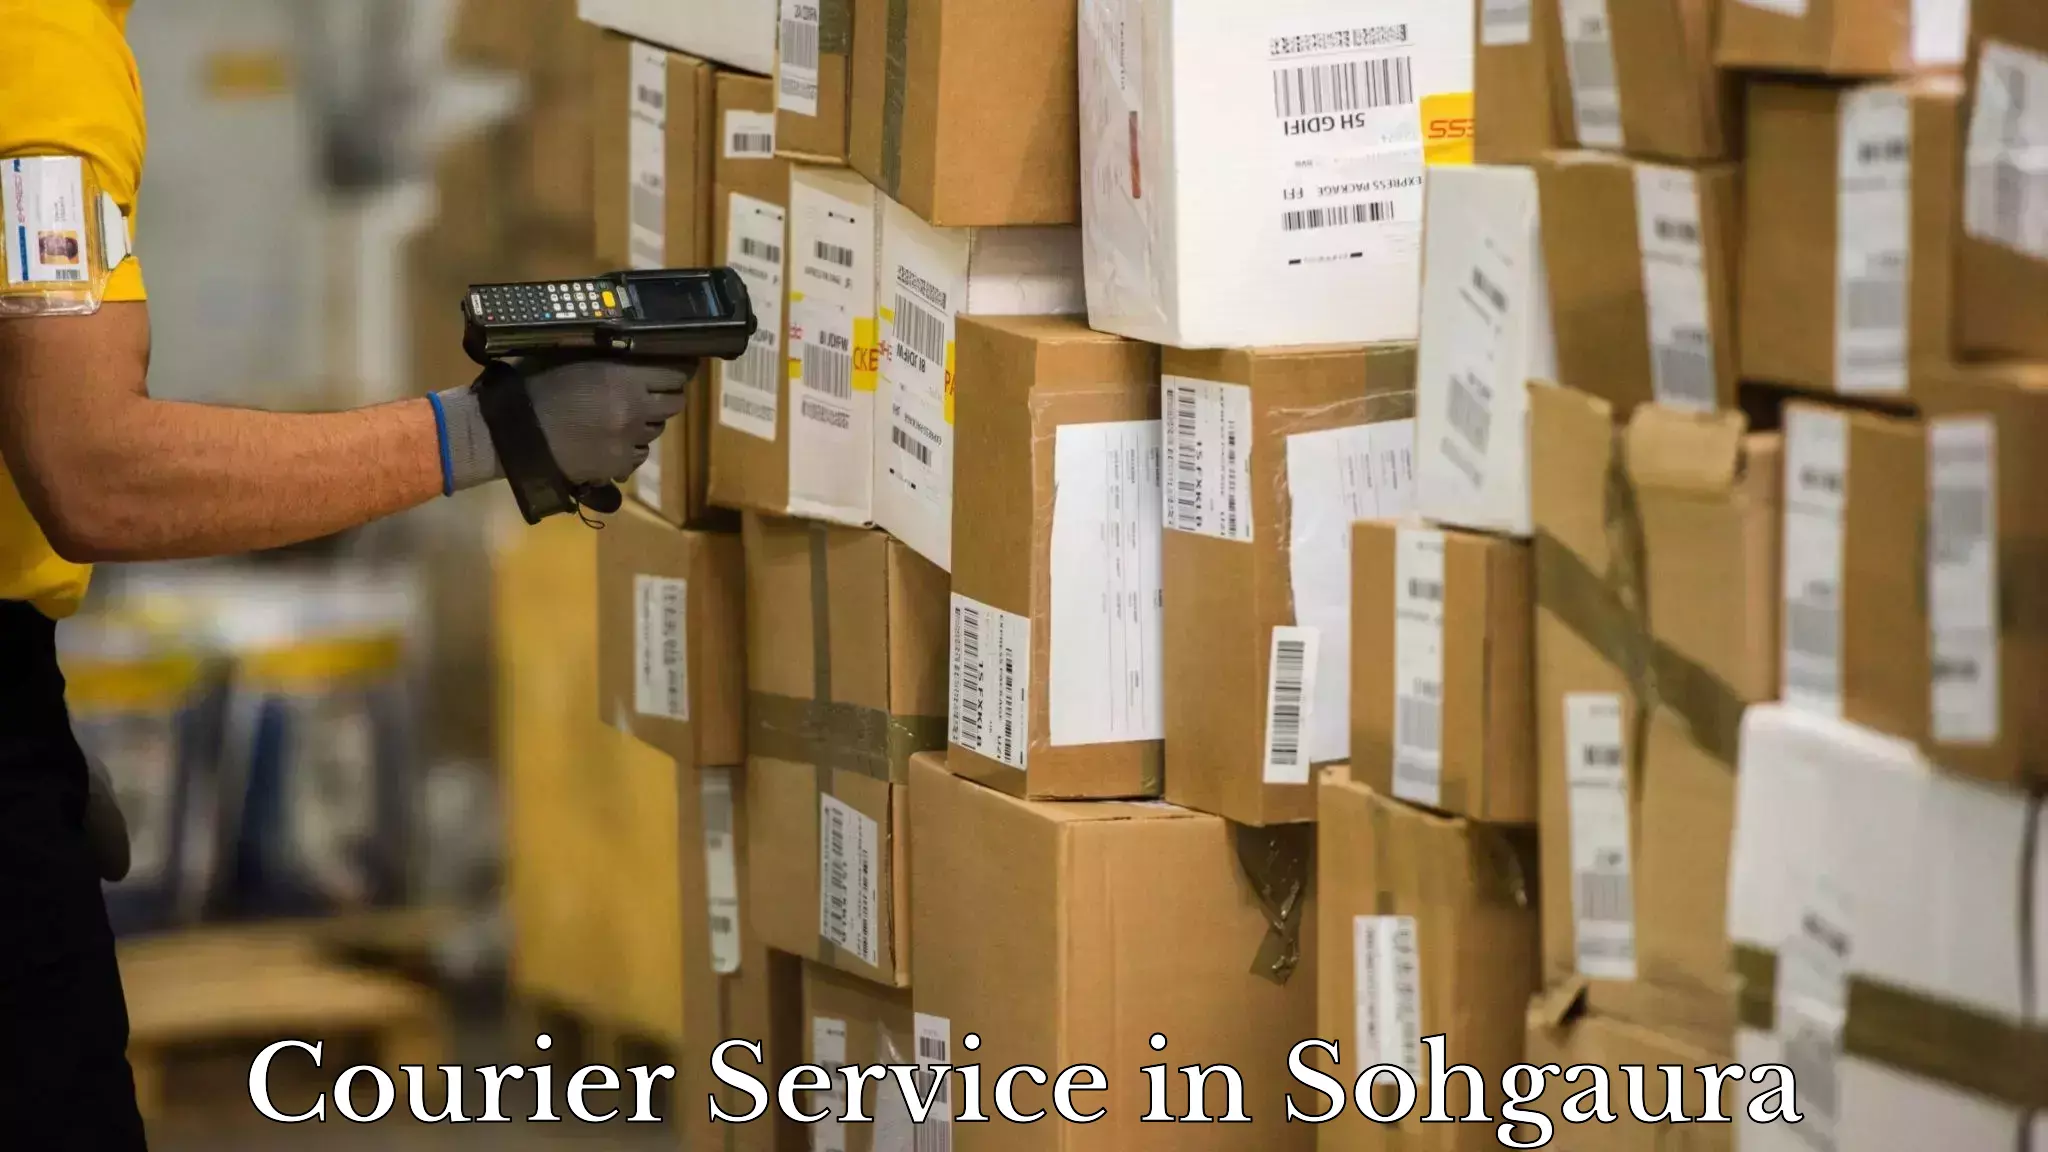 Express mail solutions in Sohgaura